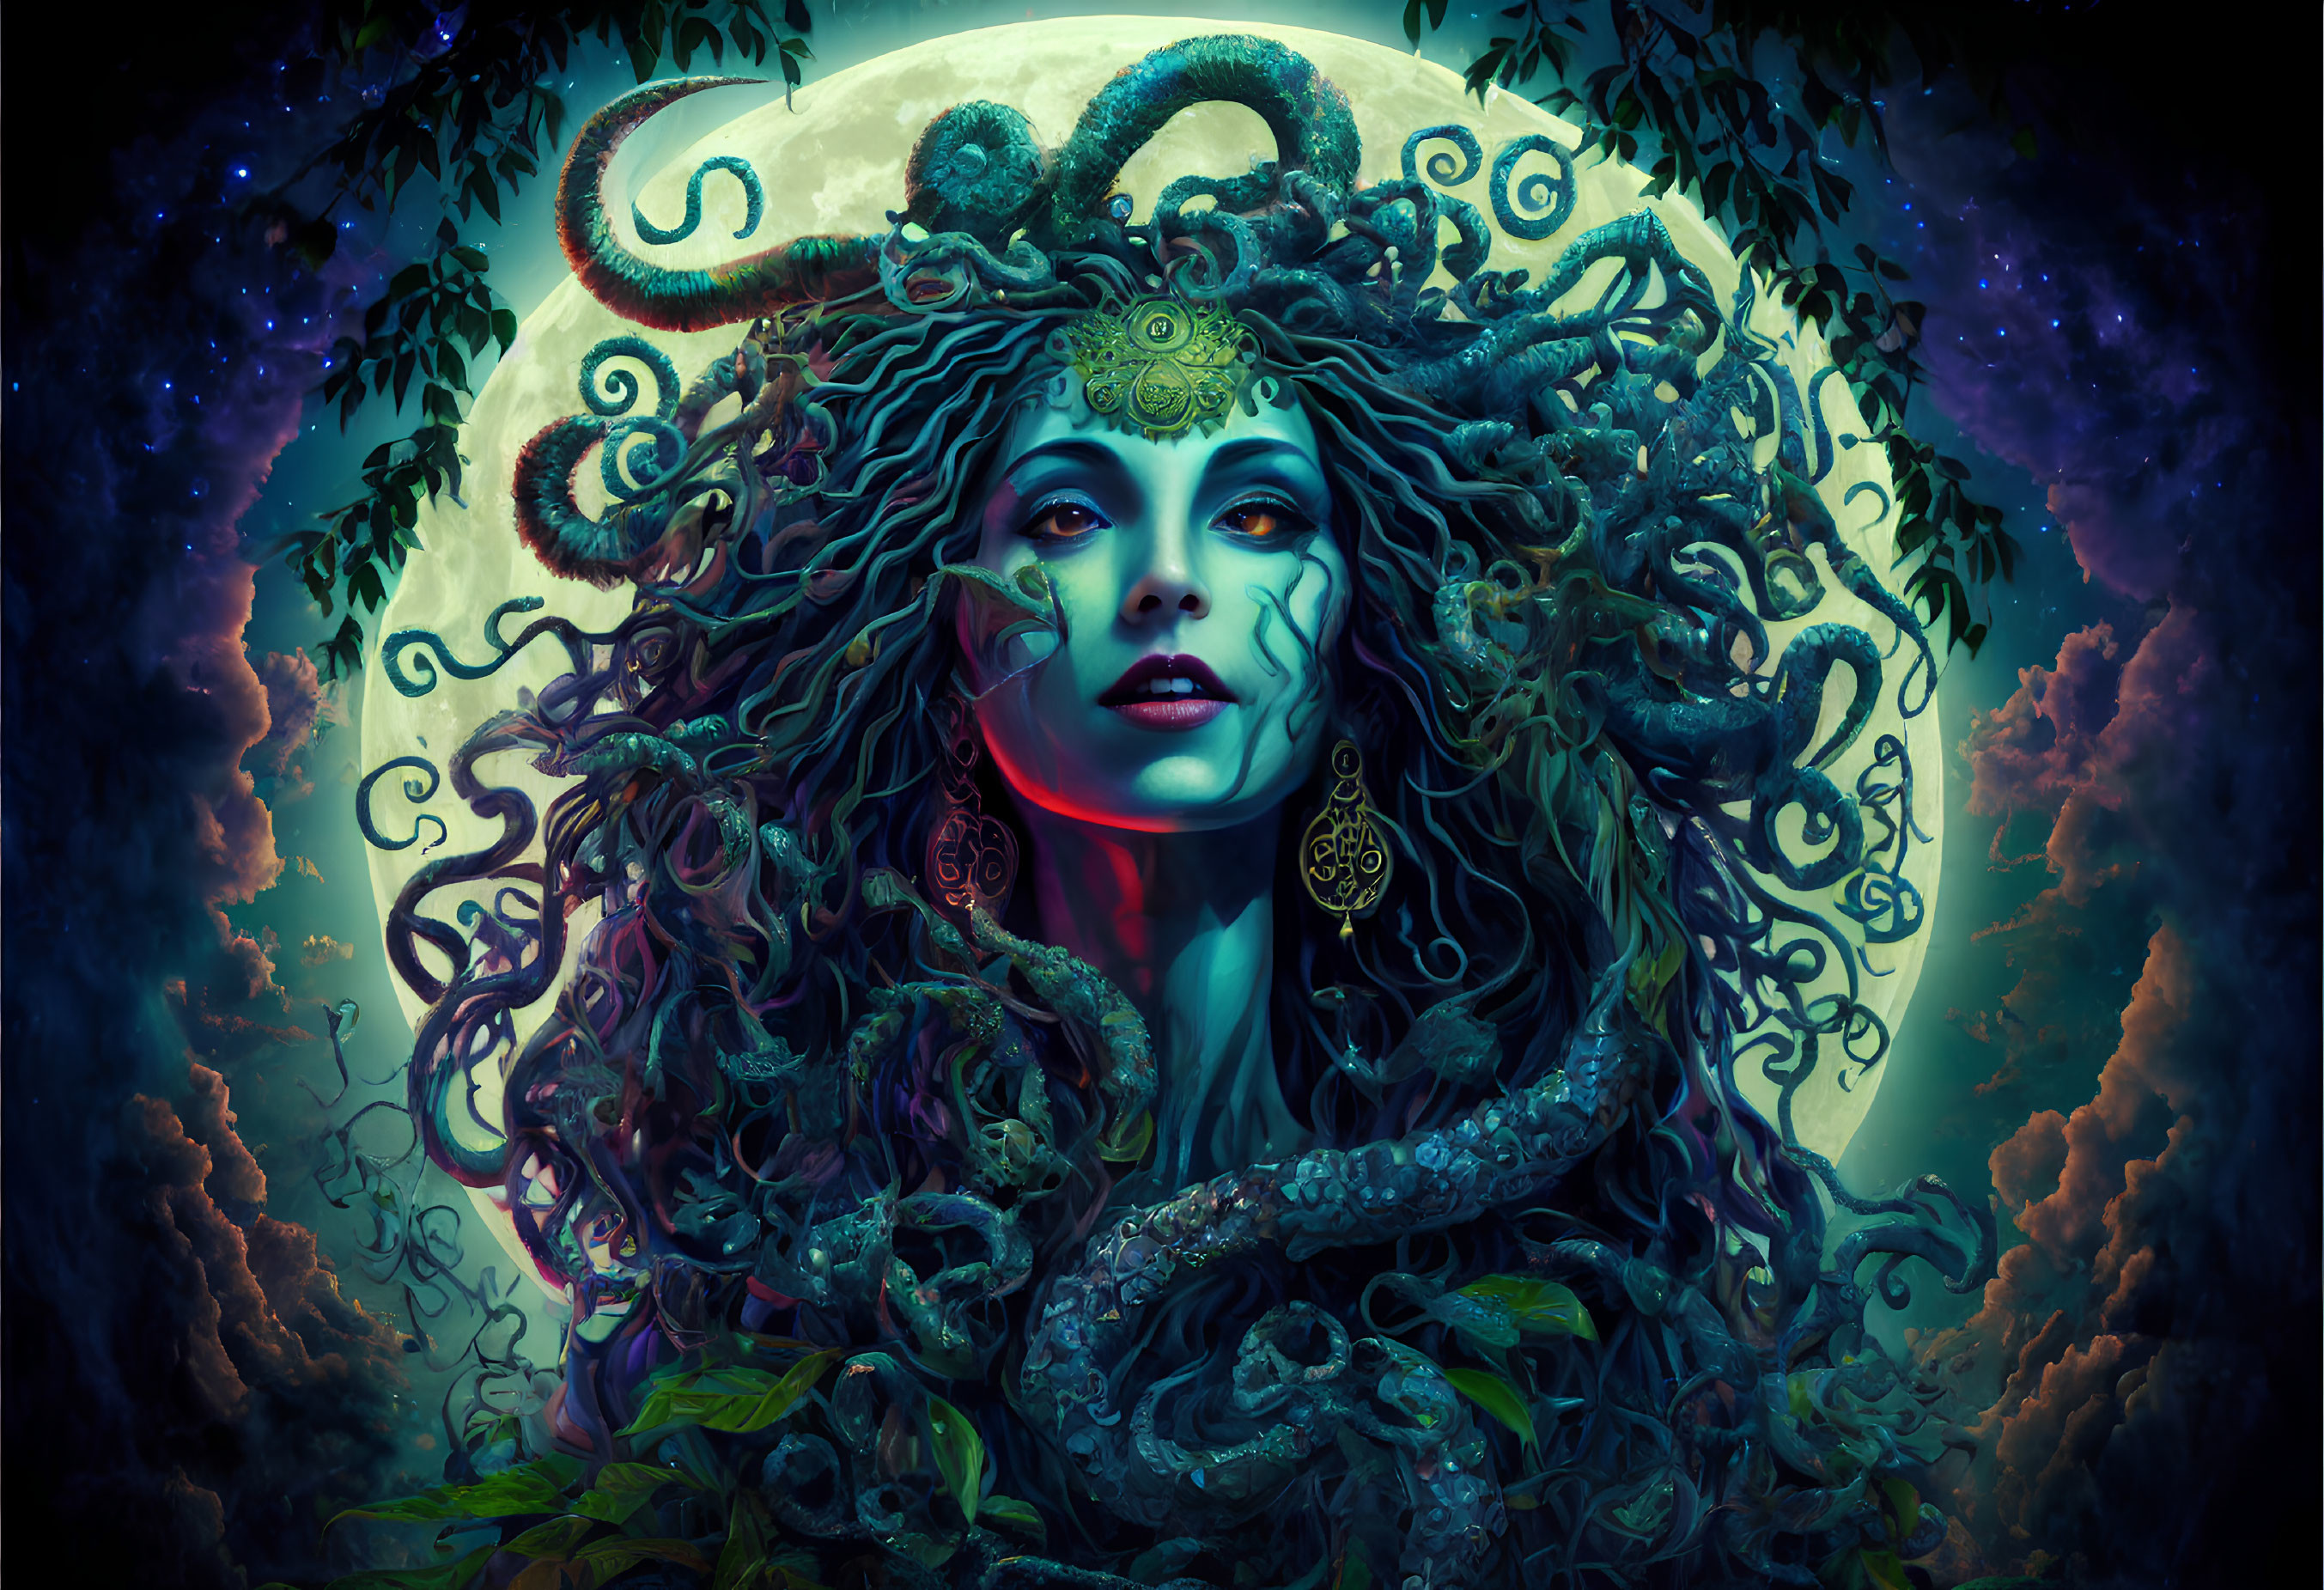 Mythical Woman with Snake Hair in Celestial Setting